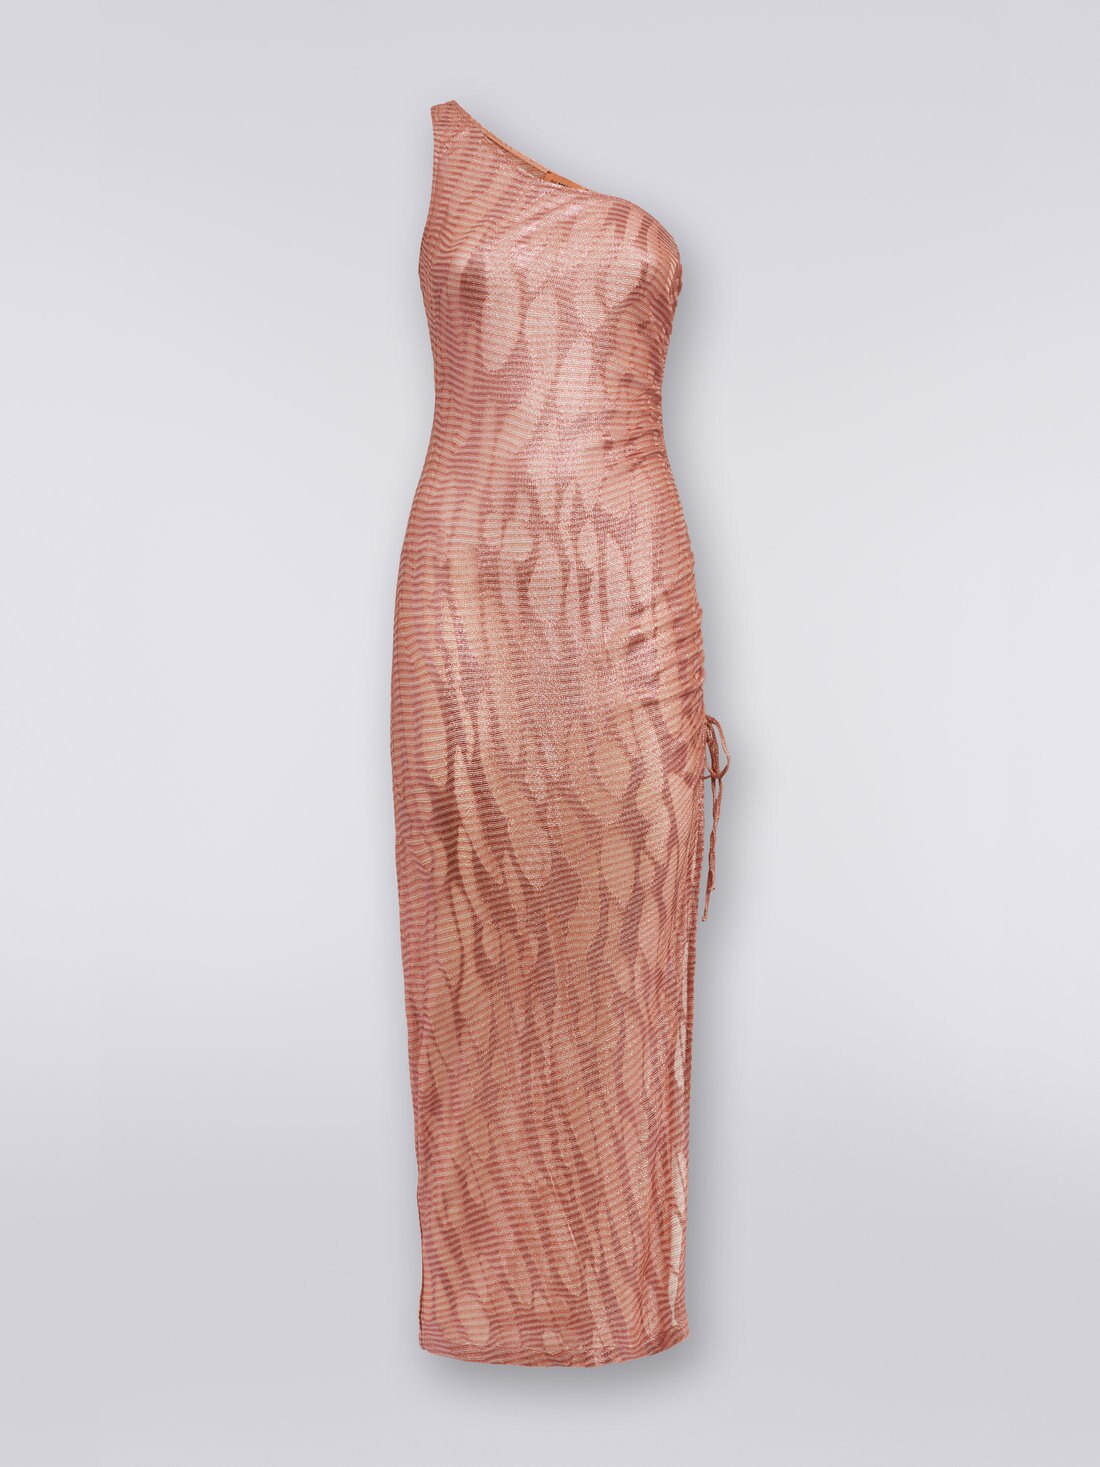 Long one-shoulder cover up in jacquard viscose knit, Pink - 0